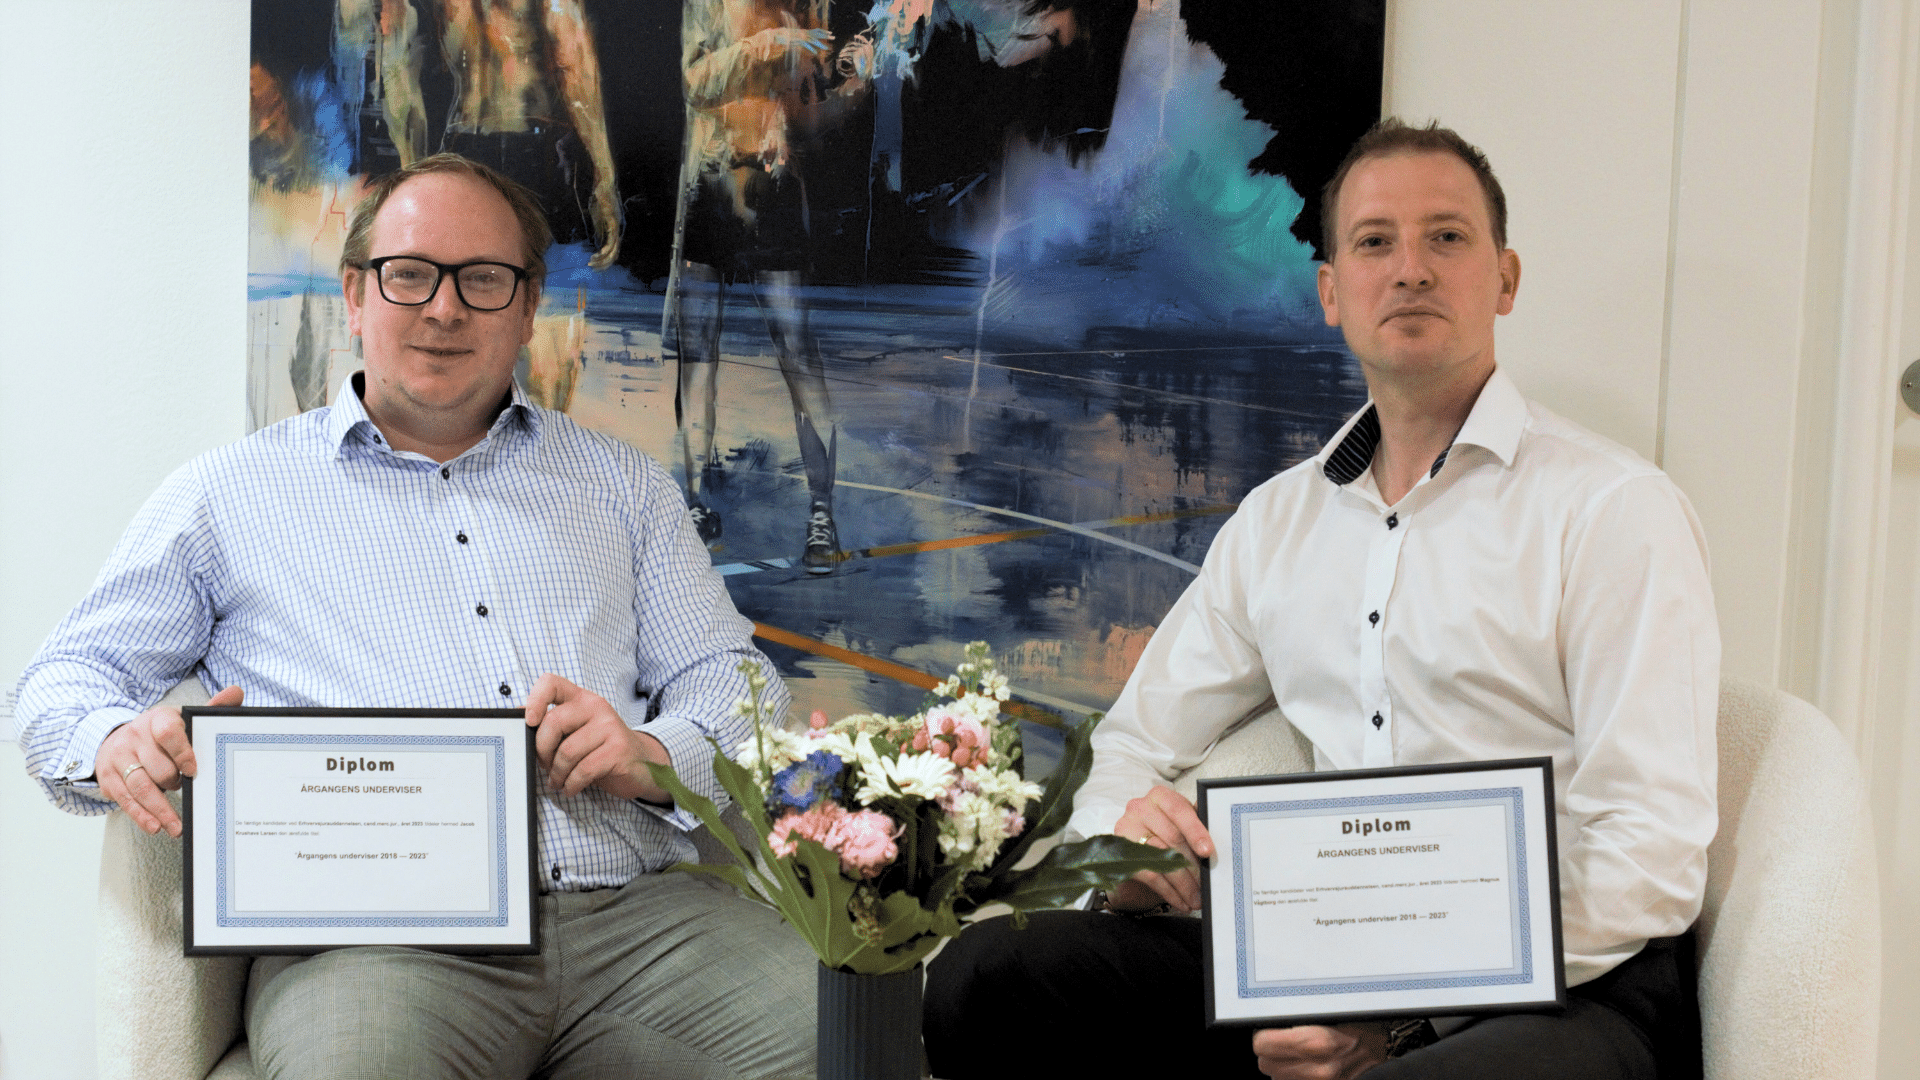 Jacob Krushave and Magnus Vagtborg Sitting in front of a Painting showing their diplomas rewarded to the Best Lecturer by the Class of 2023 Master of Science (MSc) of Business Law at Aalborg University